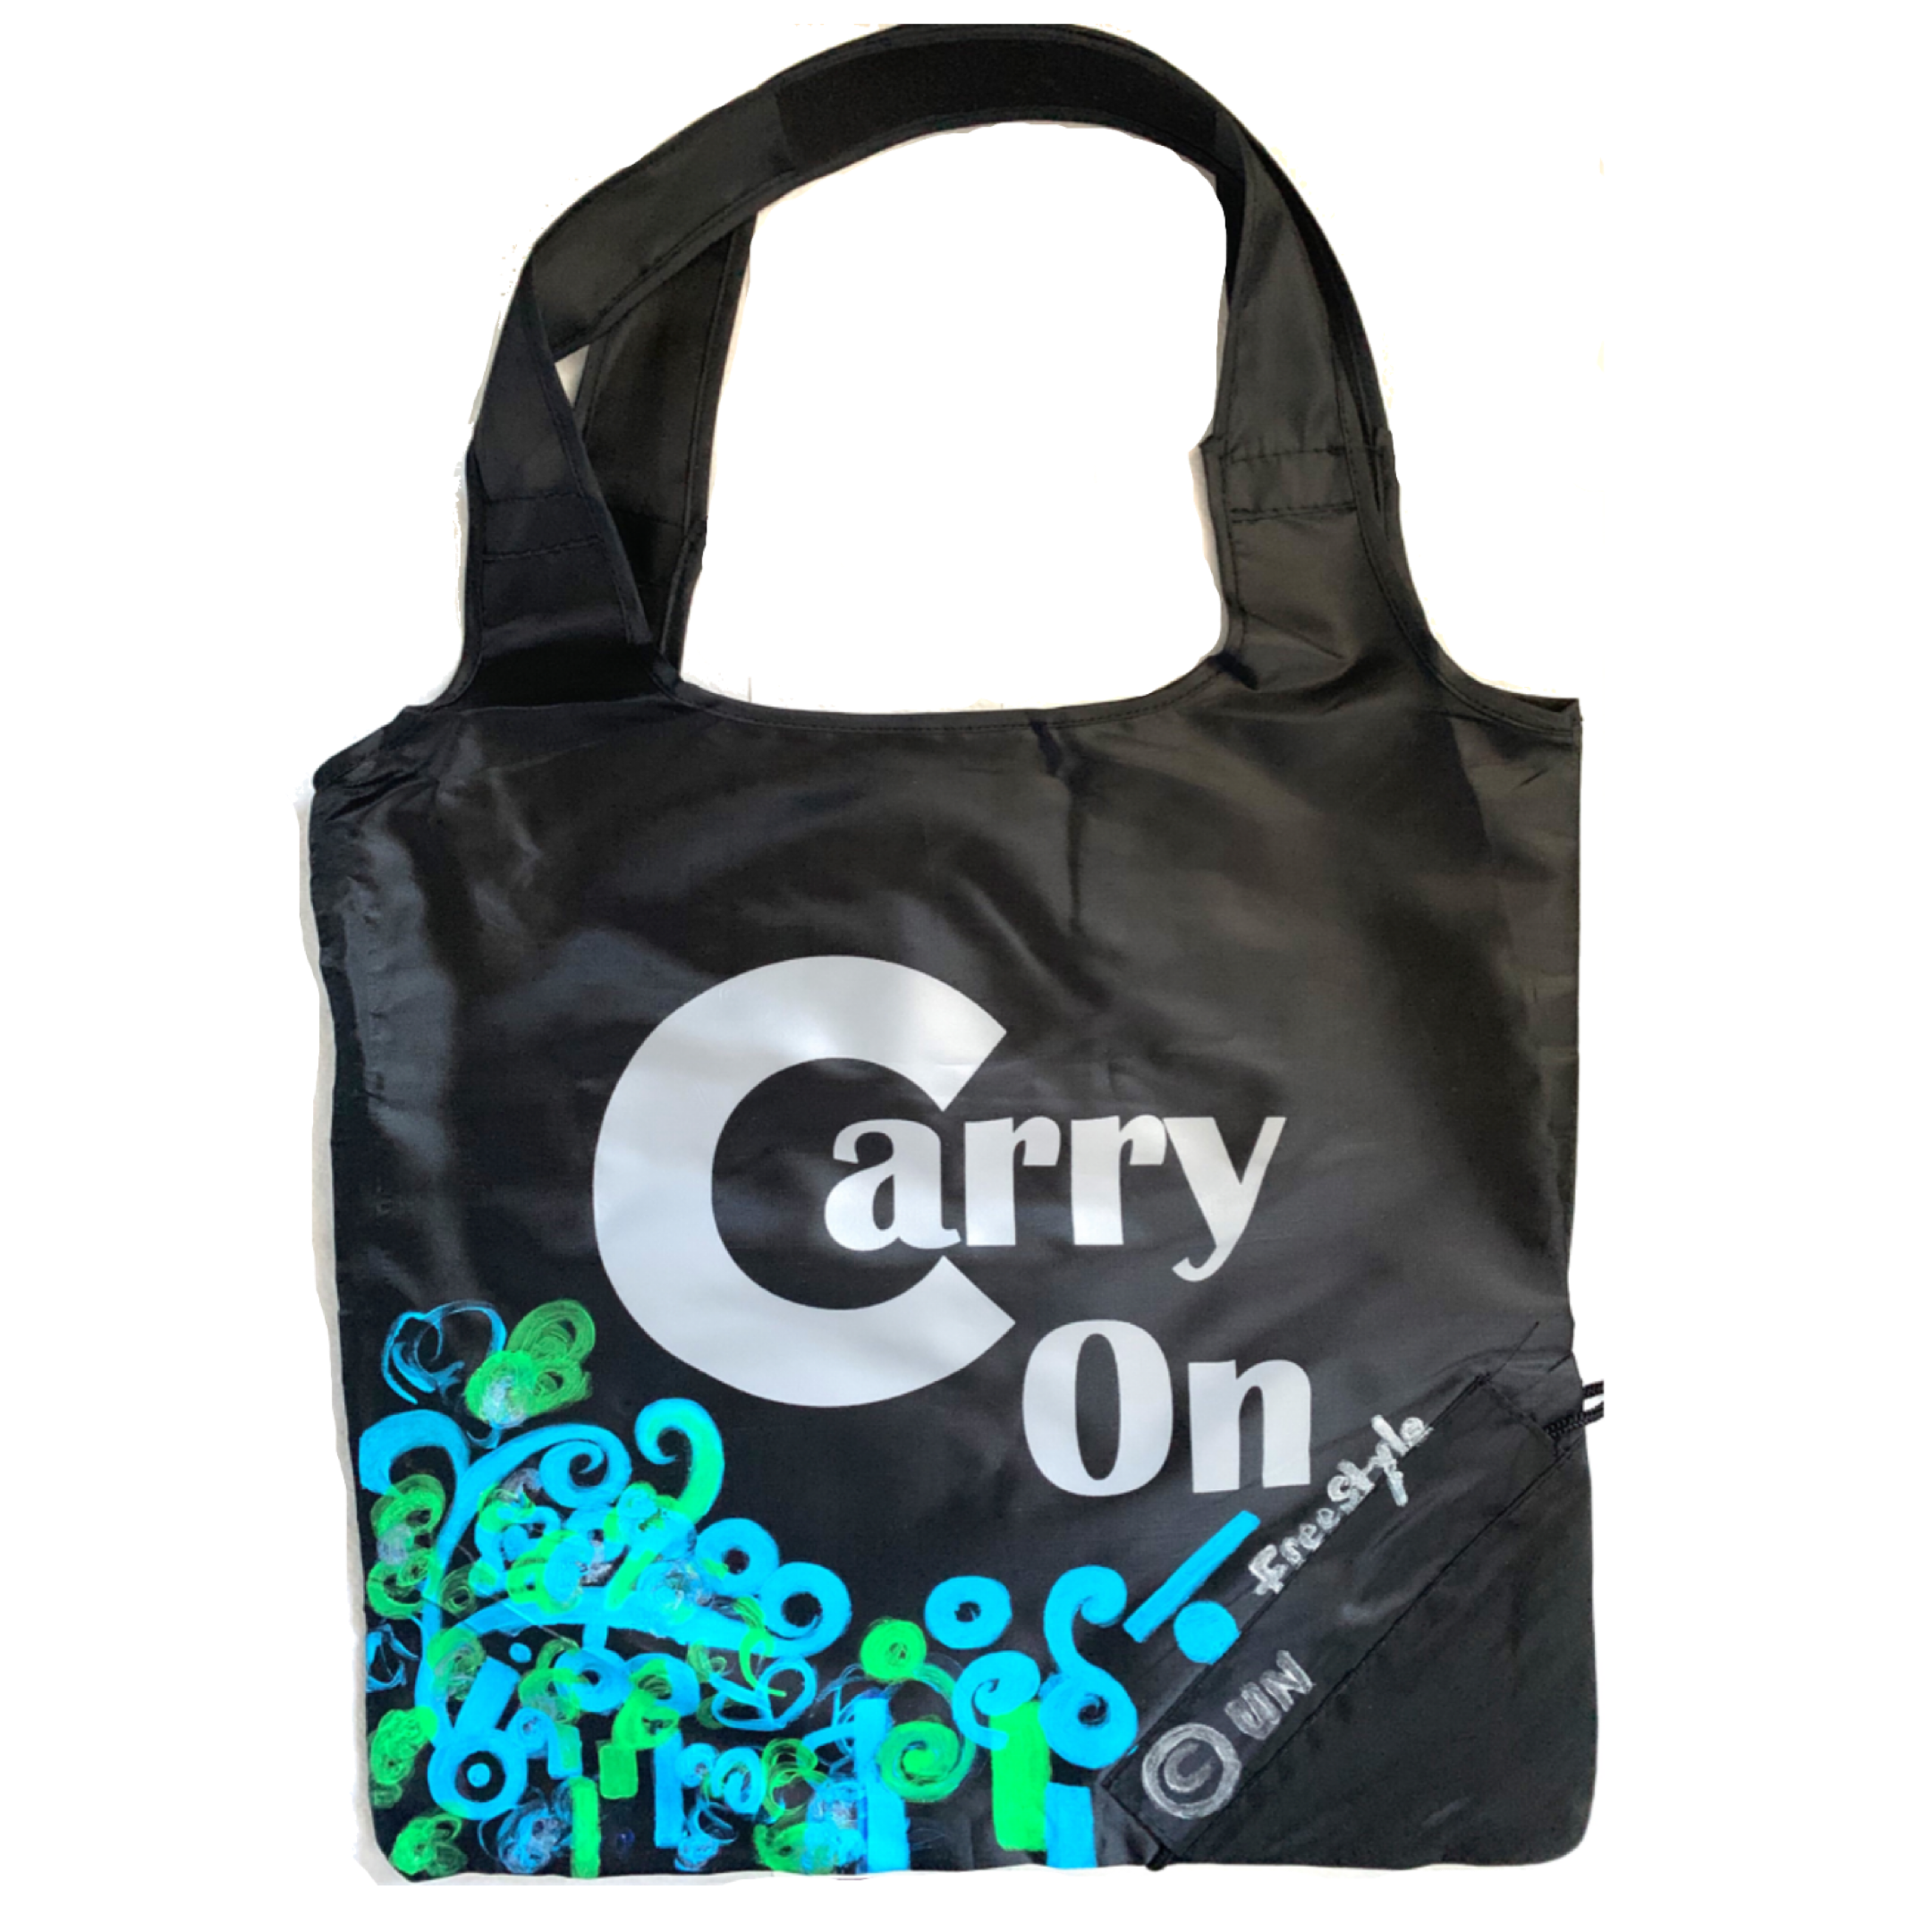 Tote Piece FreeStyle Abstract Painted Design